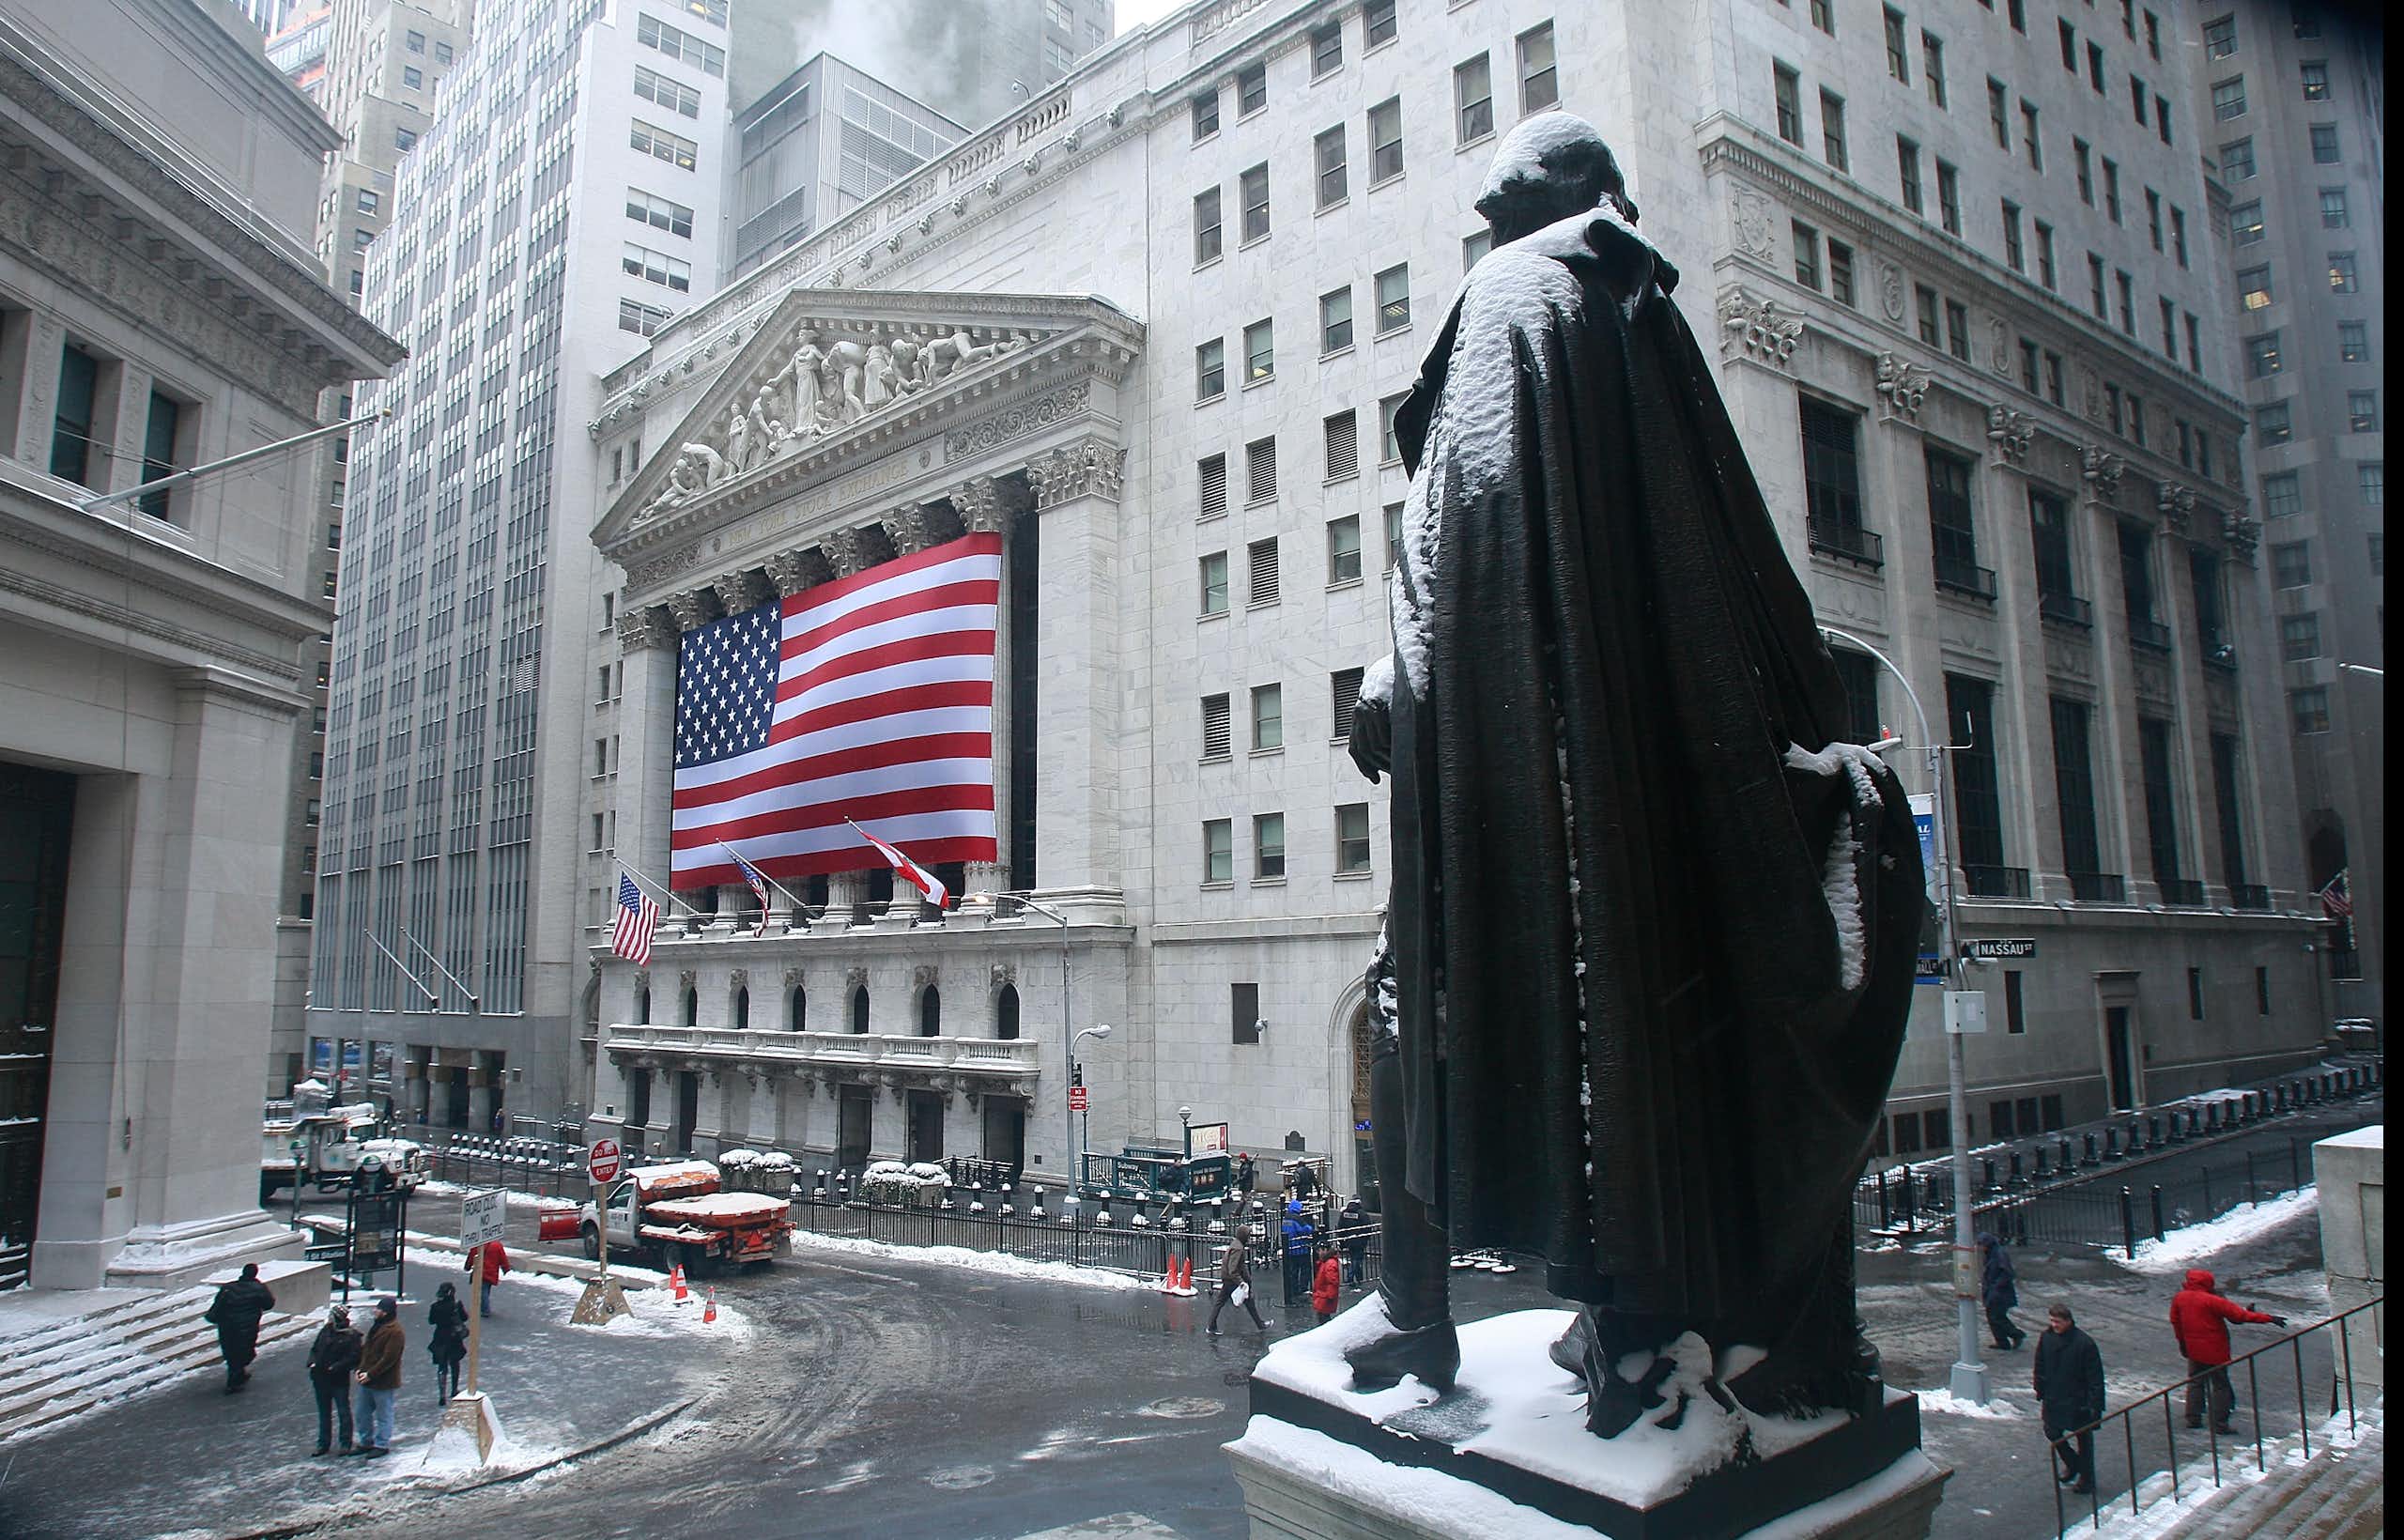 View of Wall Street and the New York Stock Exchange across a snowy street.